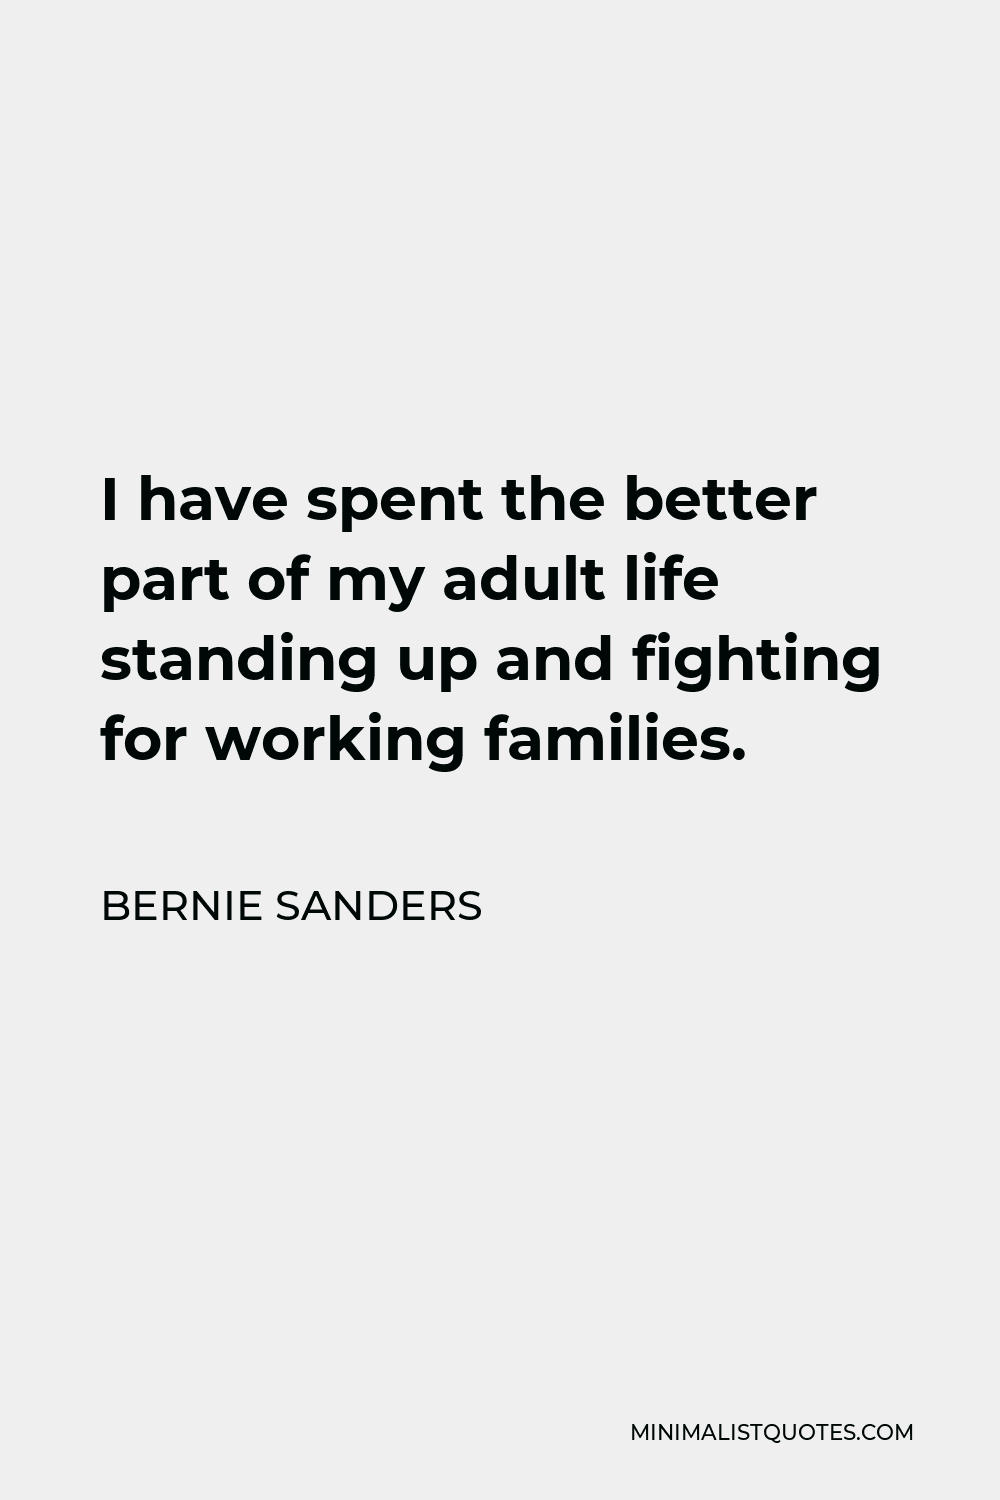 Bernie Sanders Quote - I have spent the better part of my adult life standing up and fighting for working families.